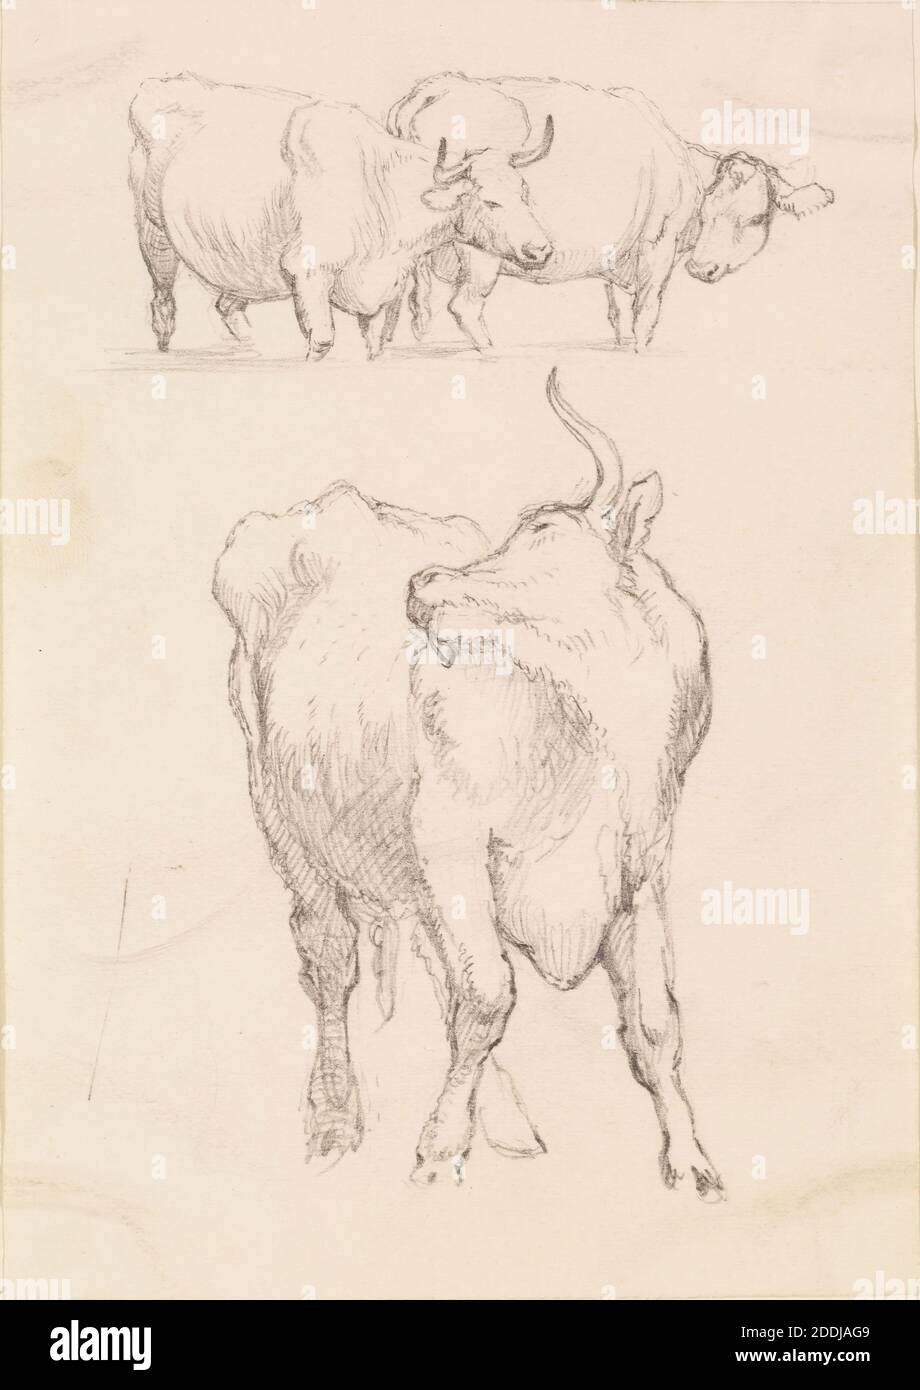 10 Black And White Pencil Sketch Of Cow And Calf Illustrations  RoyaltyFree Vector Graphics  Clip Art  iStock